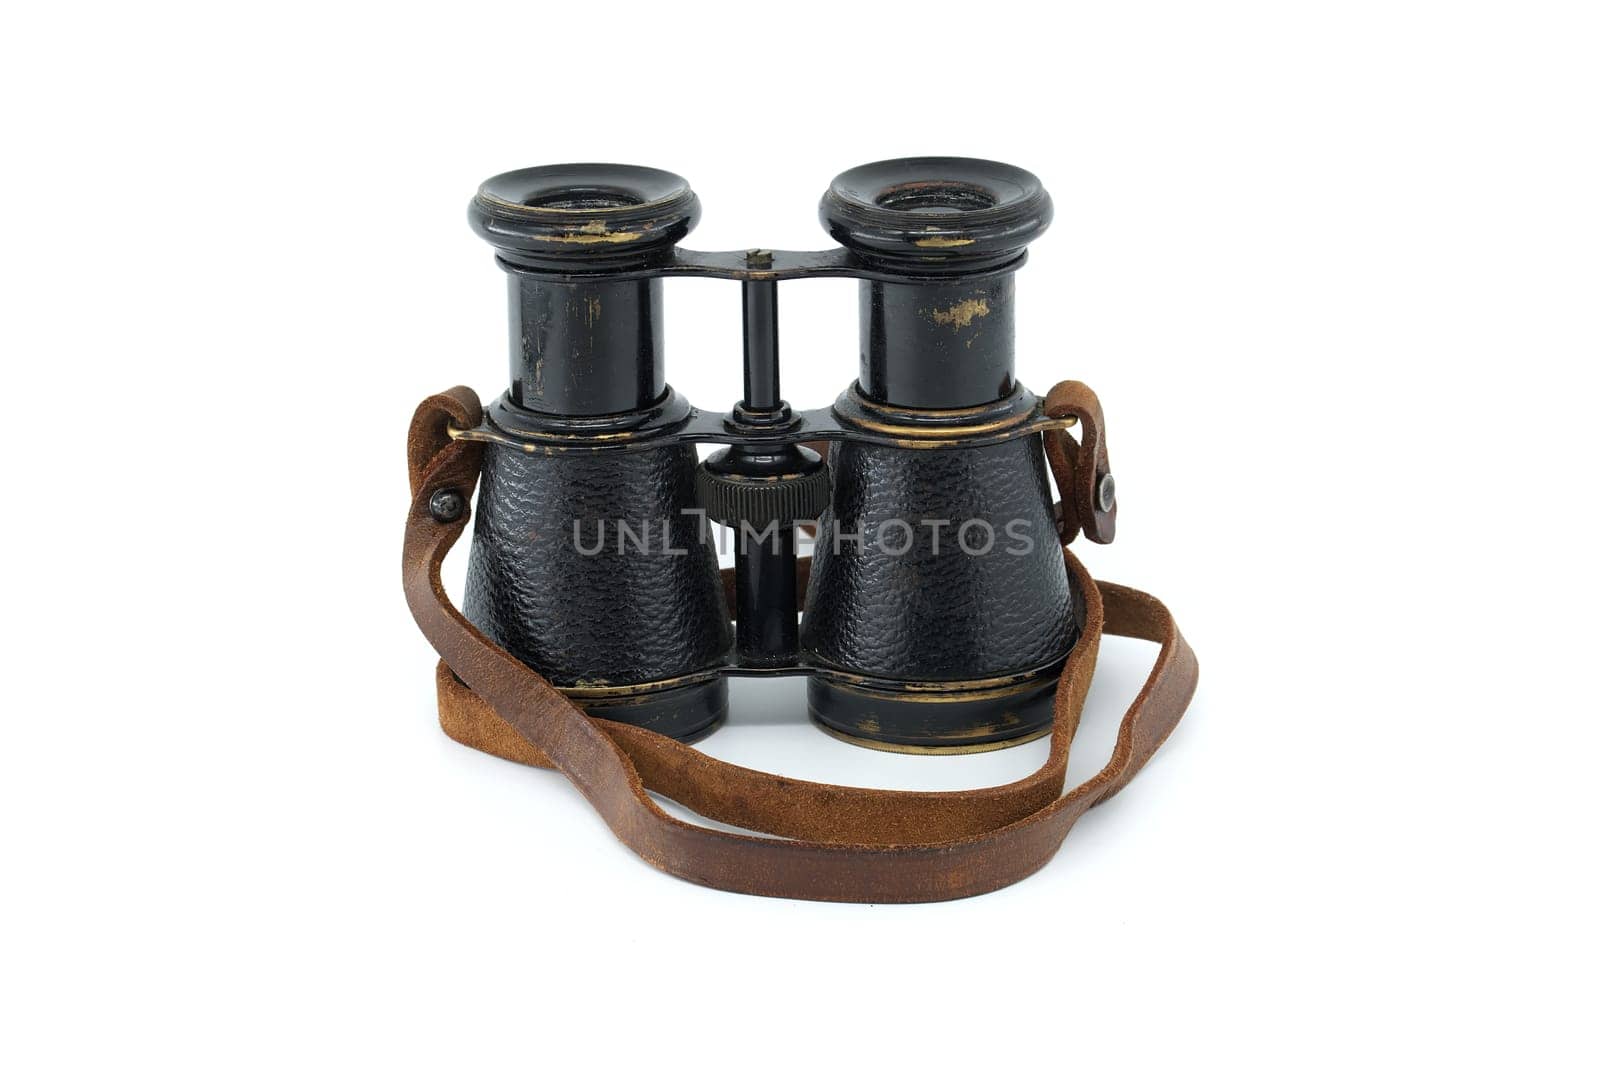 Pair of retro black binoculars with brown leather straps is showcased against a white background